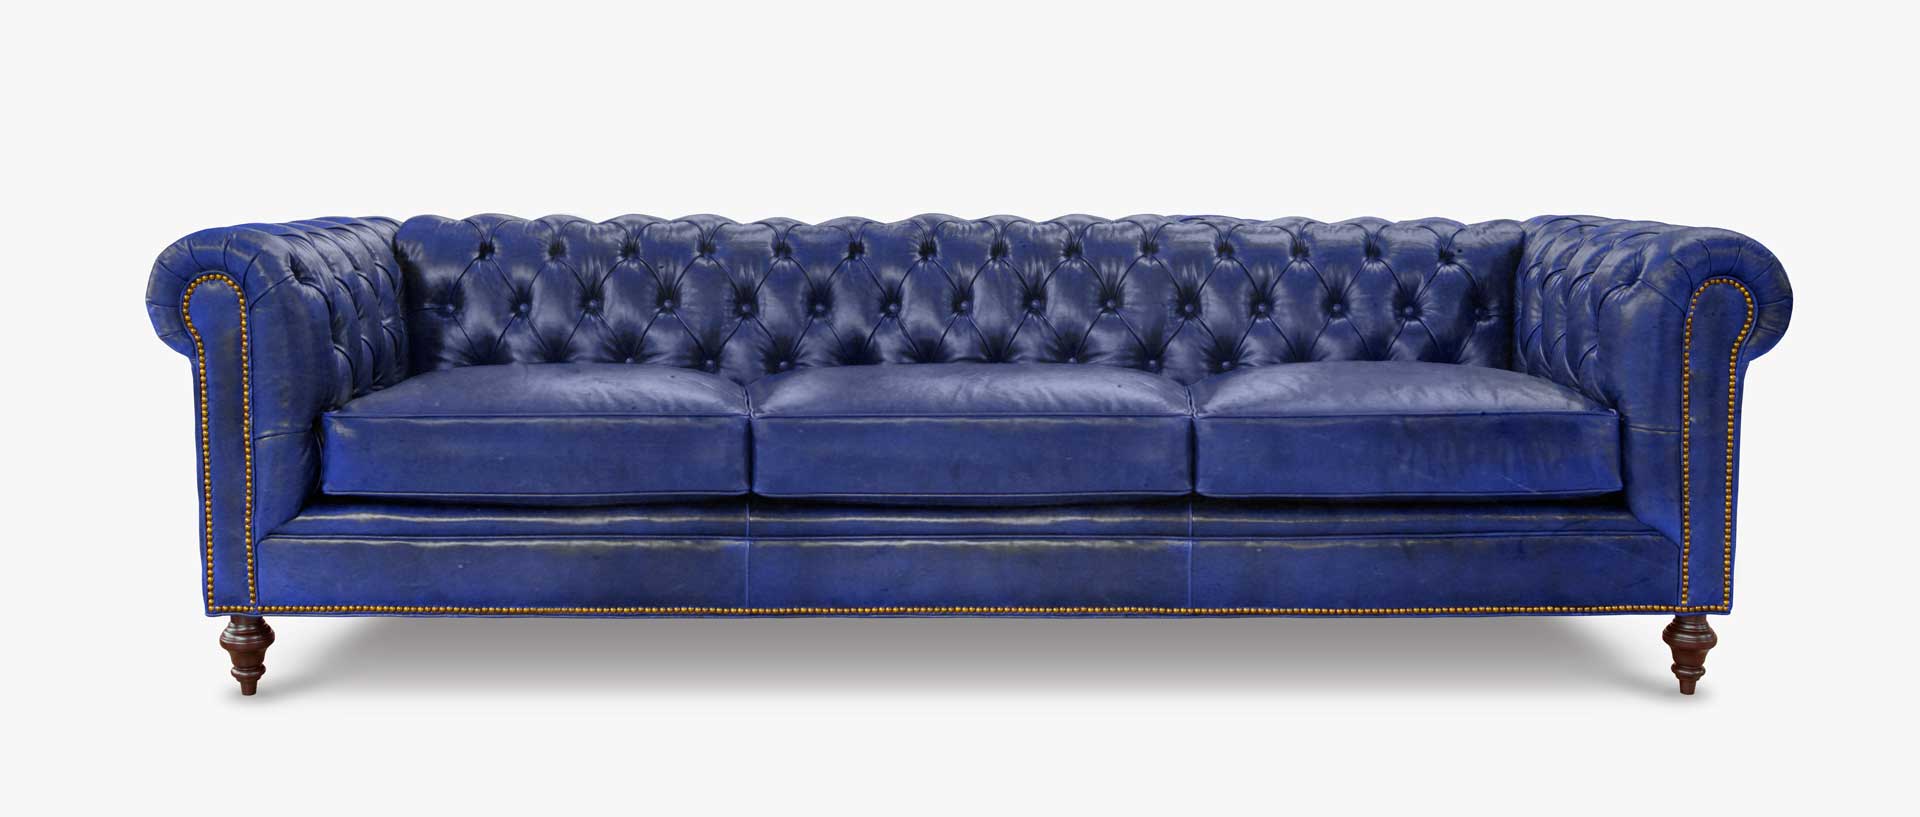 Fitzgerald Blue Leather Chesterfield Sofa